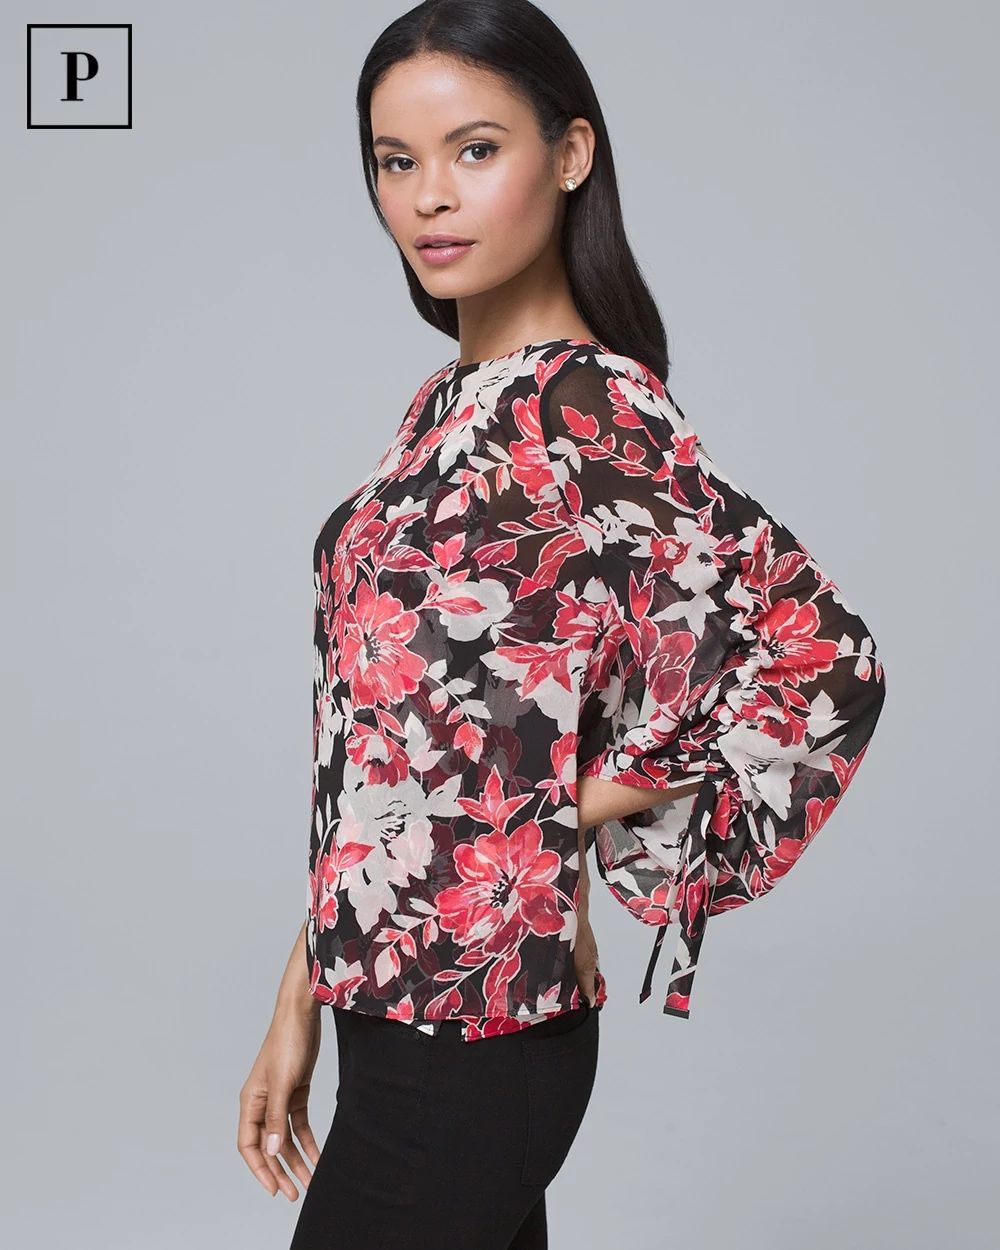 Petite Tie-Sleeve Floral Blouse click to view larger image.